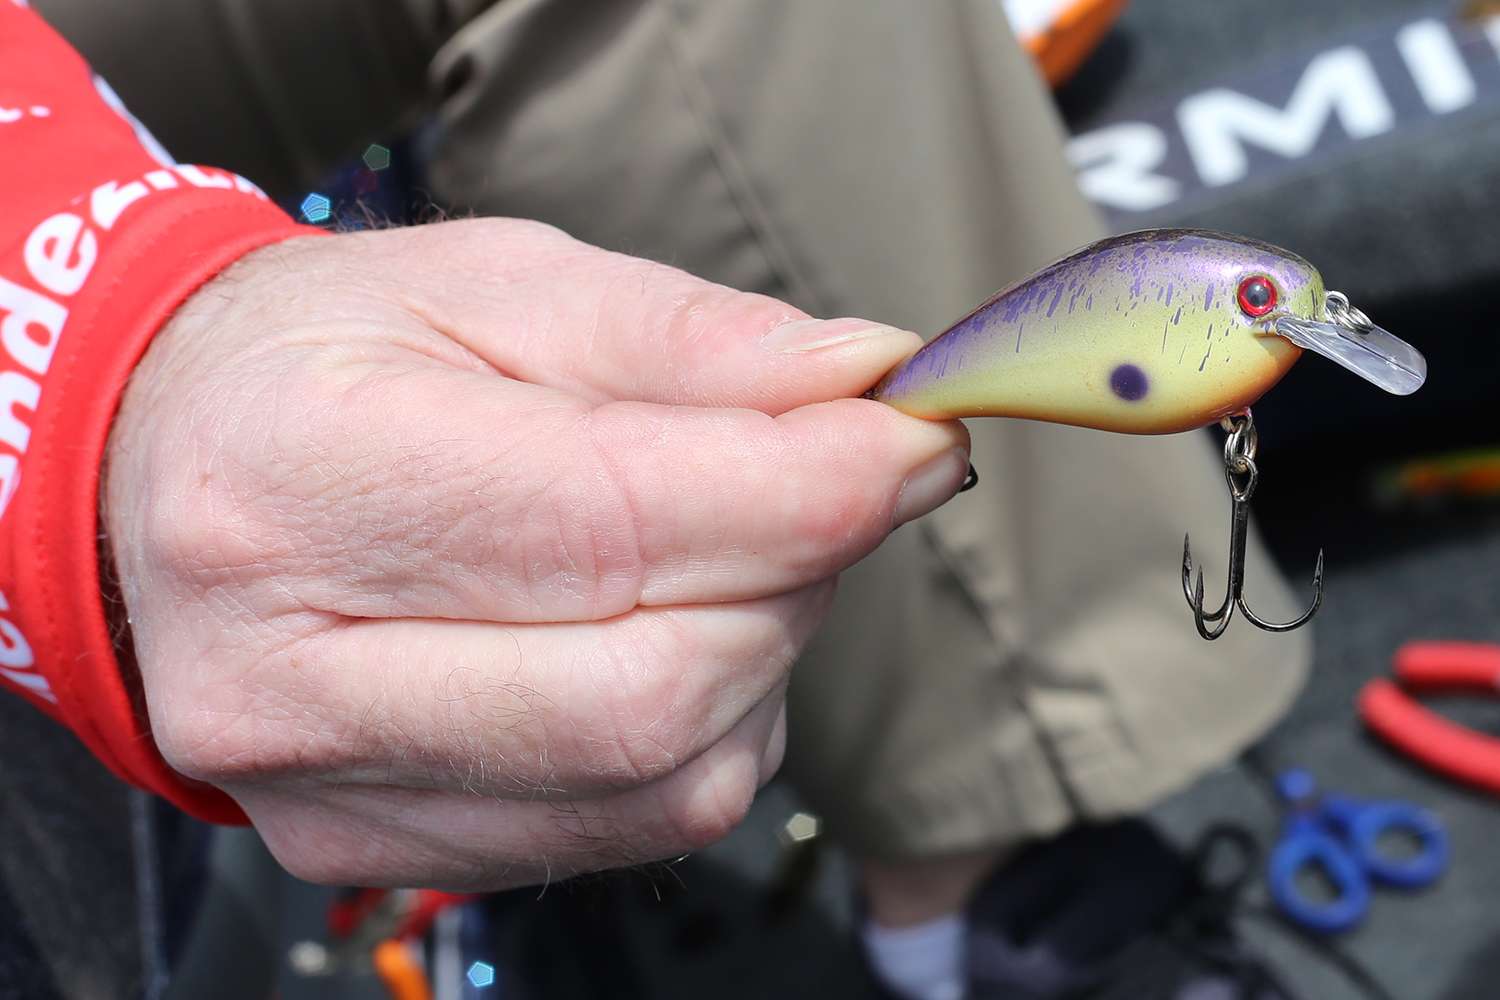 This is a very sexy looking Strike King KVD 1.5 squarebill. That color is very realistic, isn't it?